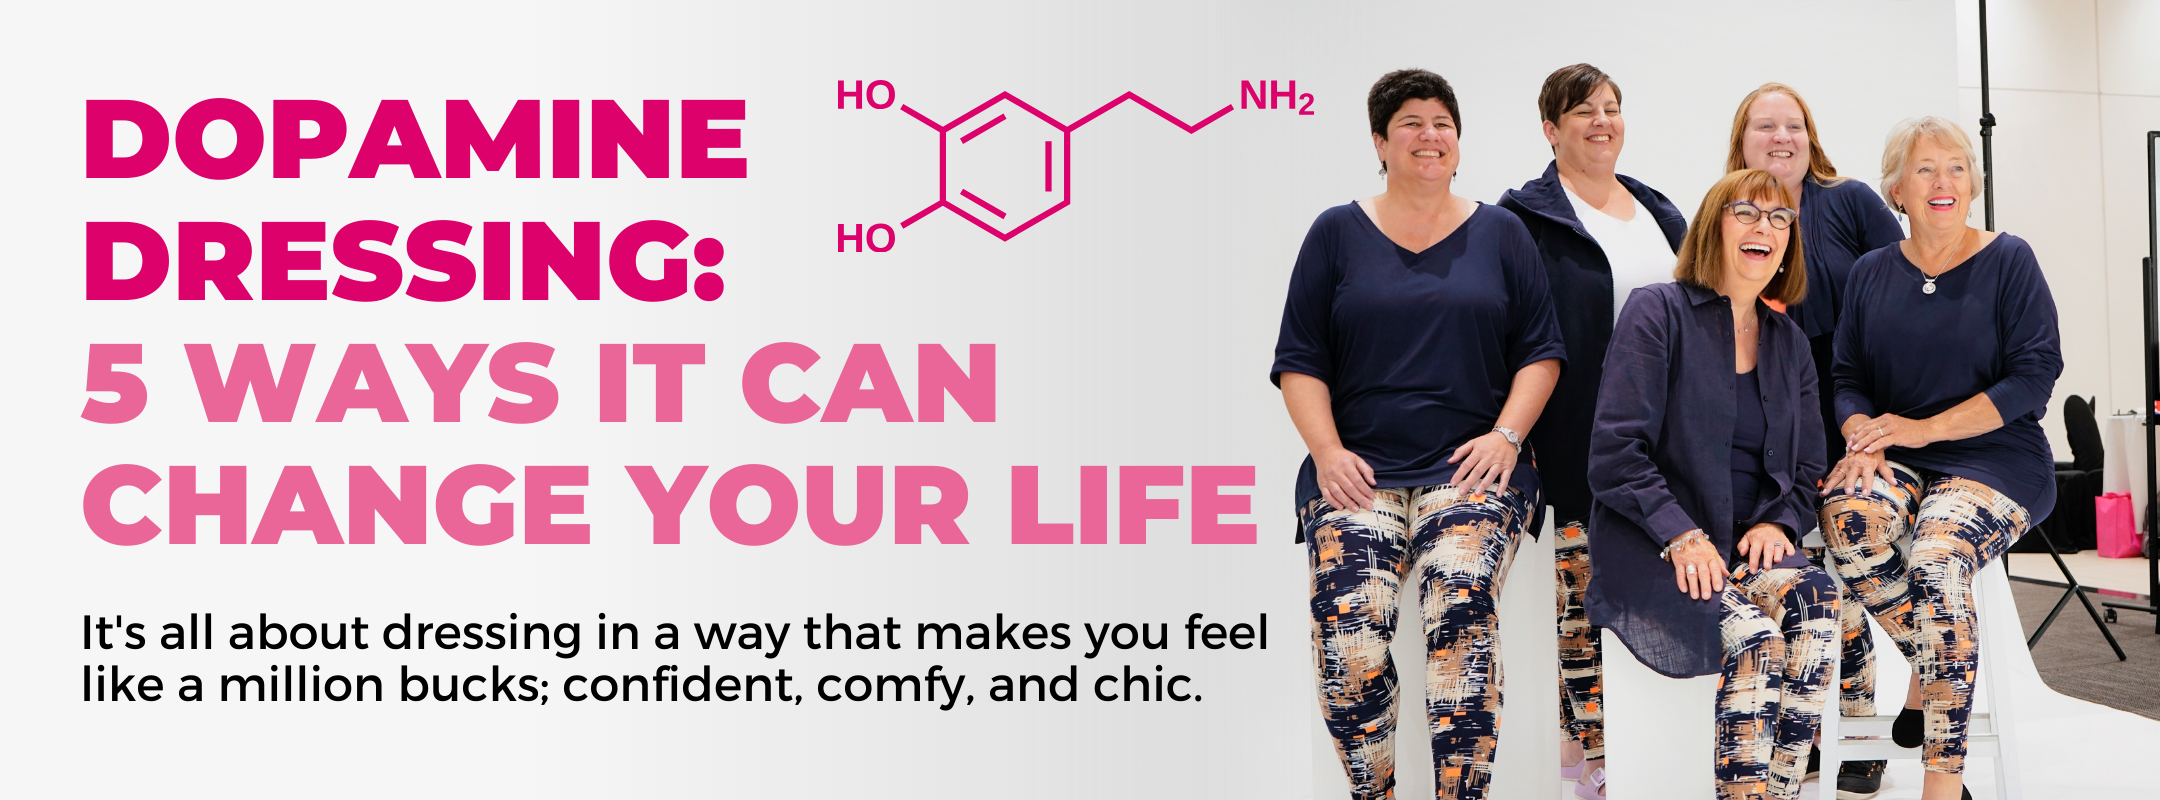 Blog Banner that says "Dopamine Dressing: 5 Ways It Can Change Your Life" with a picture of 5 women posing in their She's Got Leggz leggings and tops.